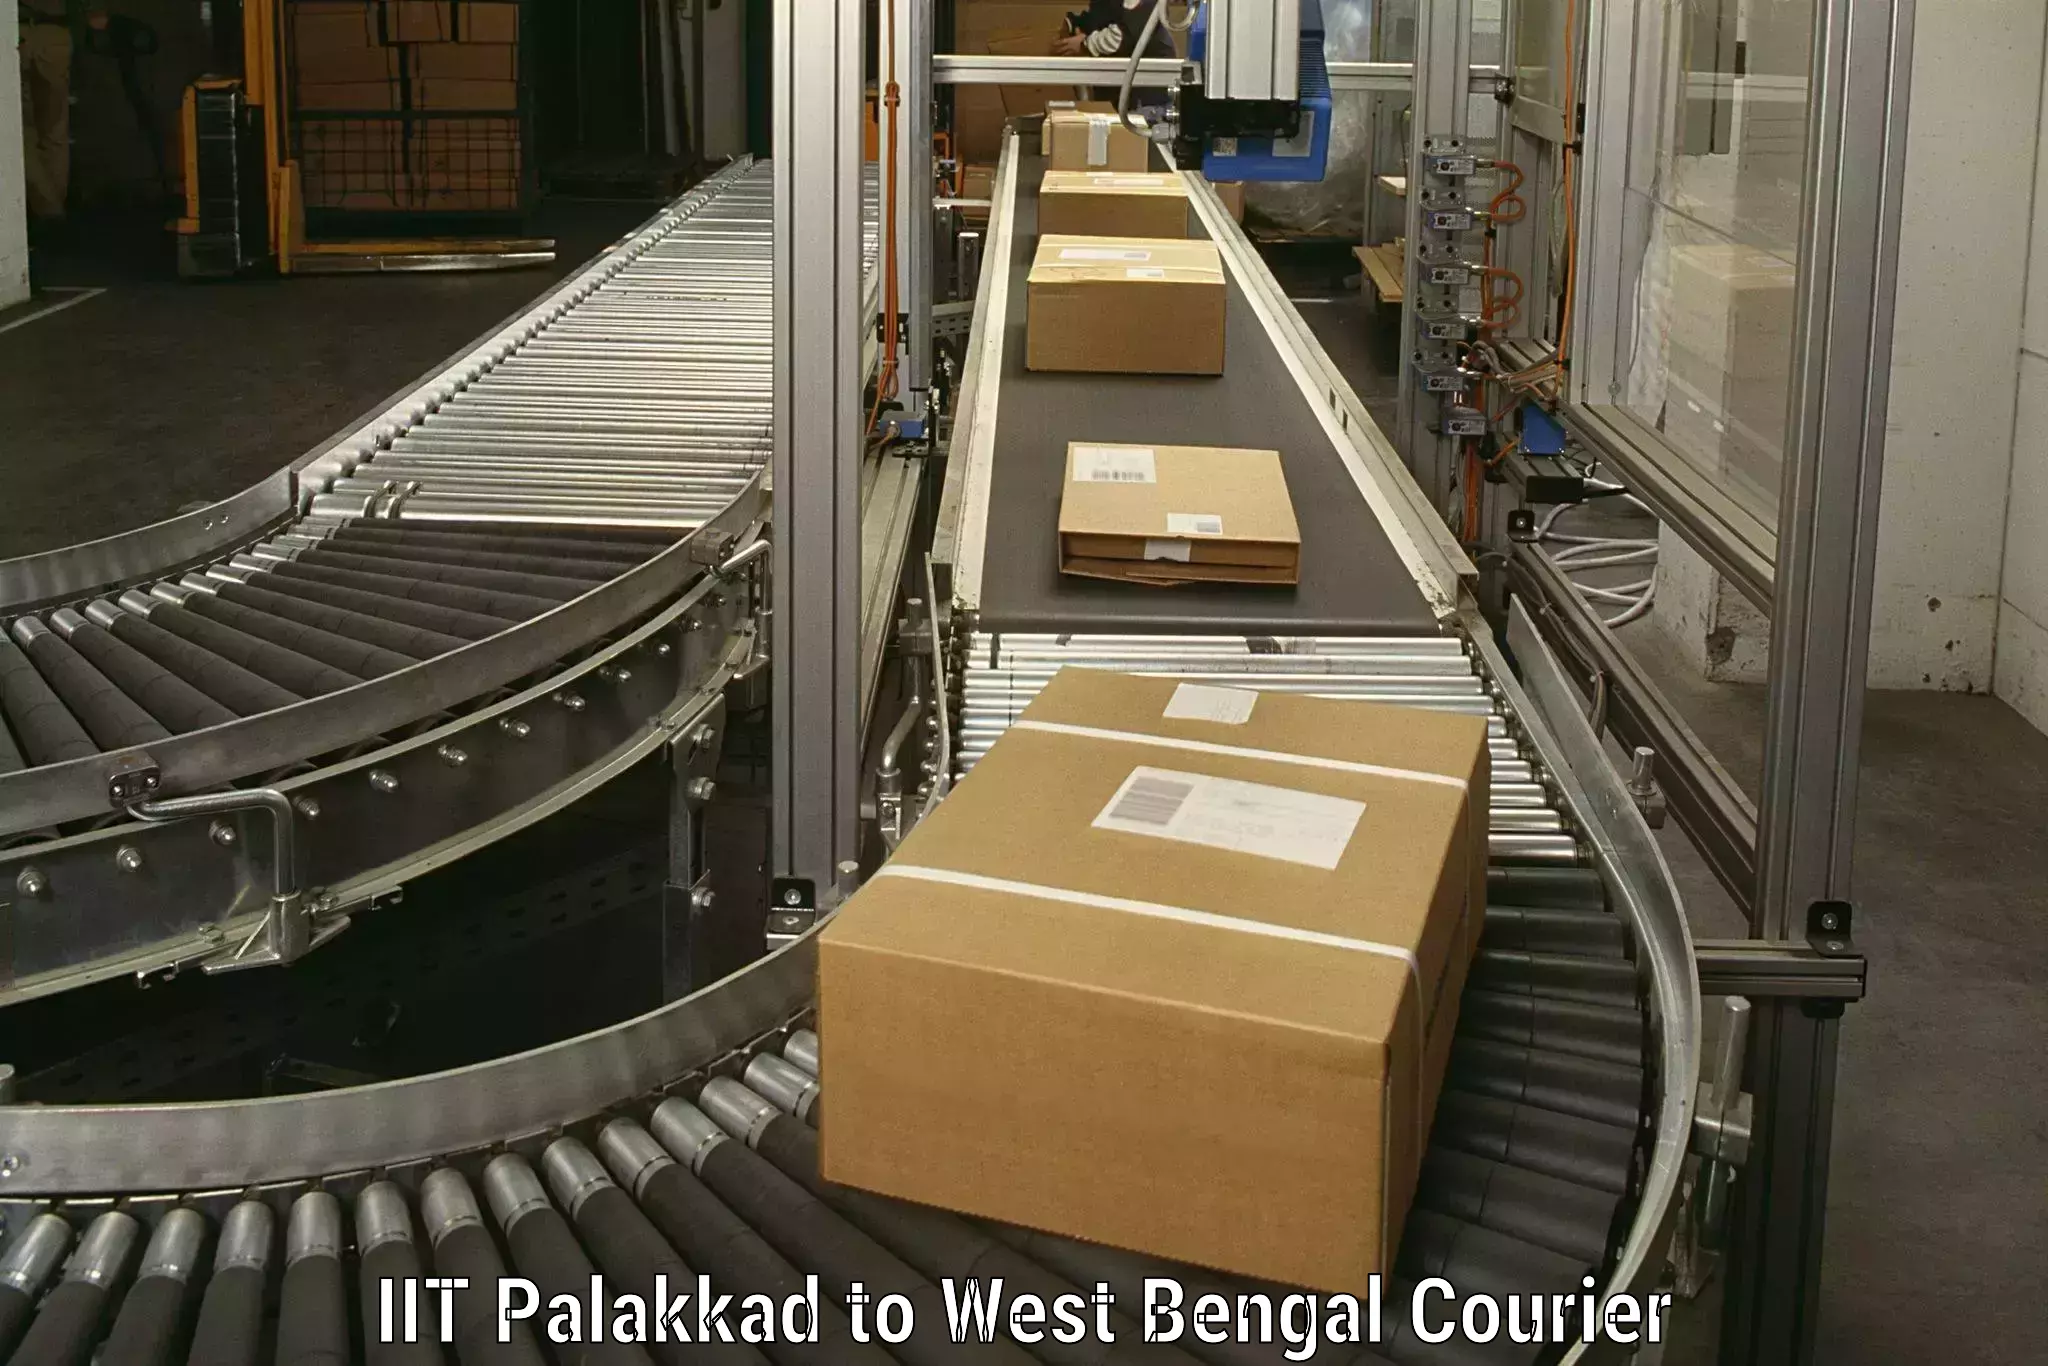 Trusted moving company IIT Palakkad to West Bengal